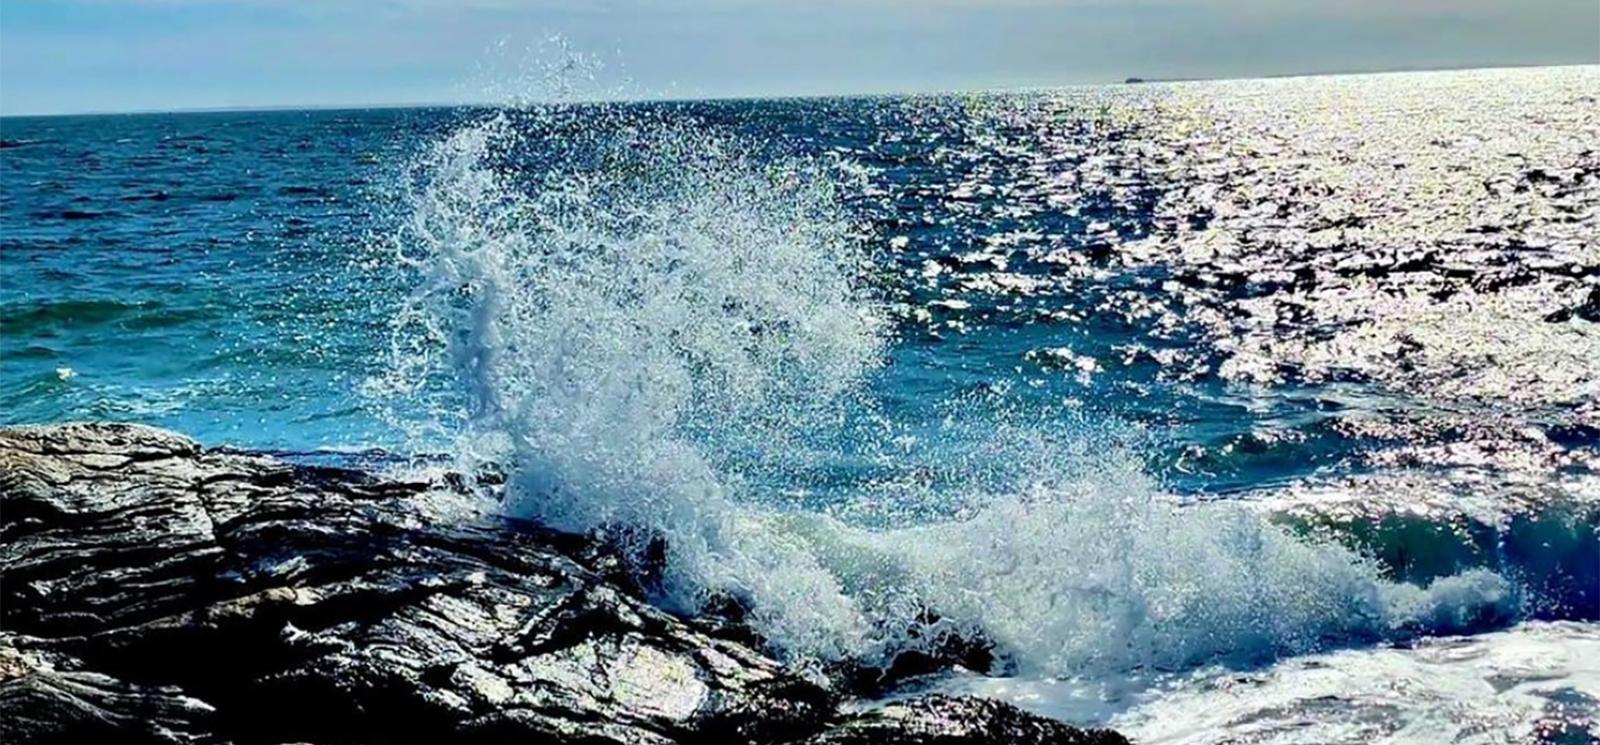 Waves crashing at Bluff Point State Park (Instagram@edison.productions)